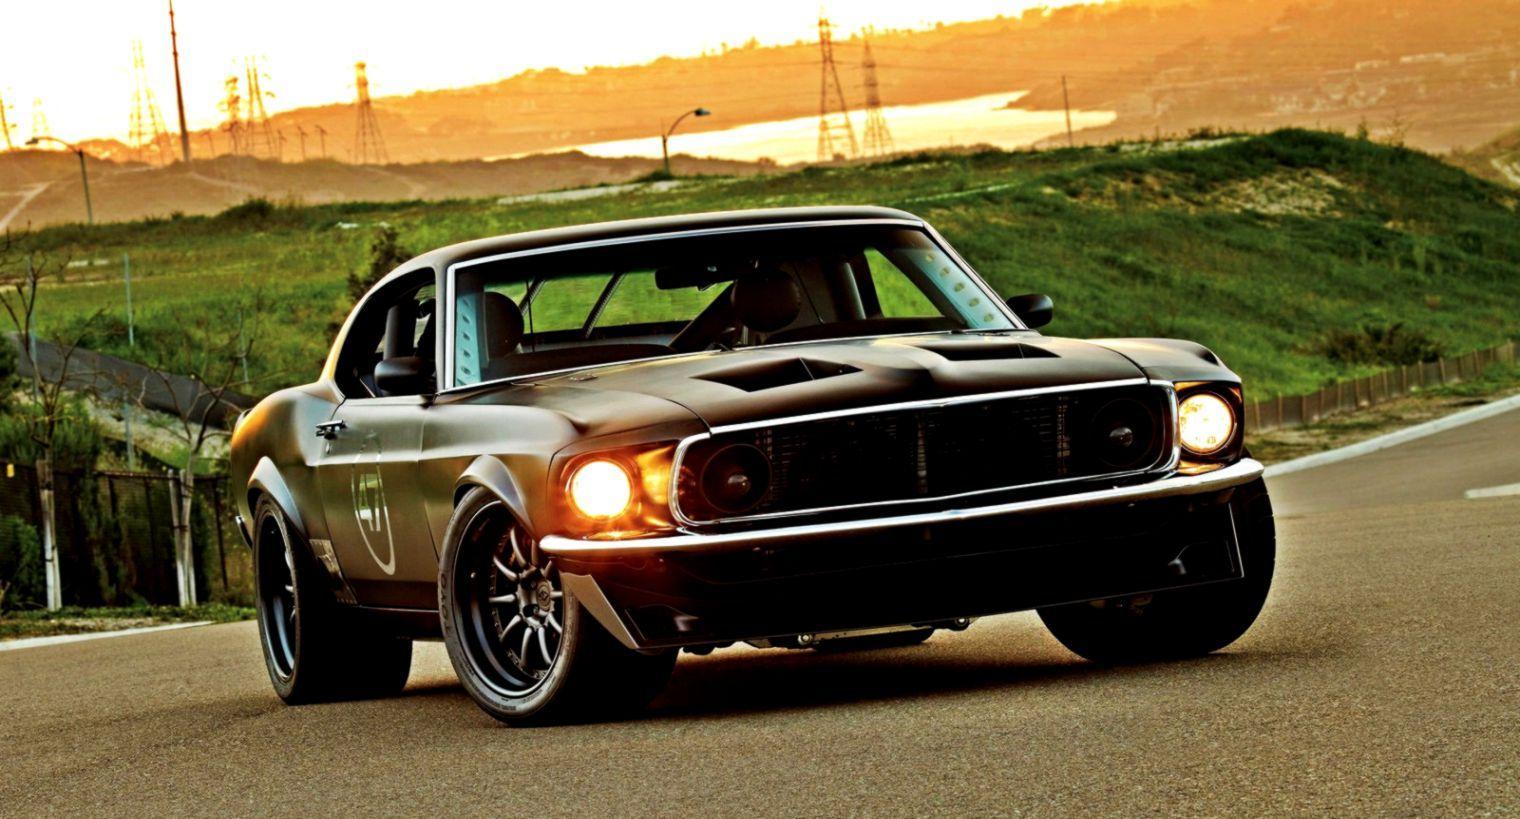 Classic Ford Mustang Wallpaper, Ford Mustang Wallpaper. HD